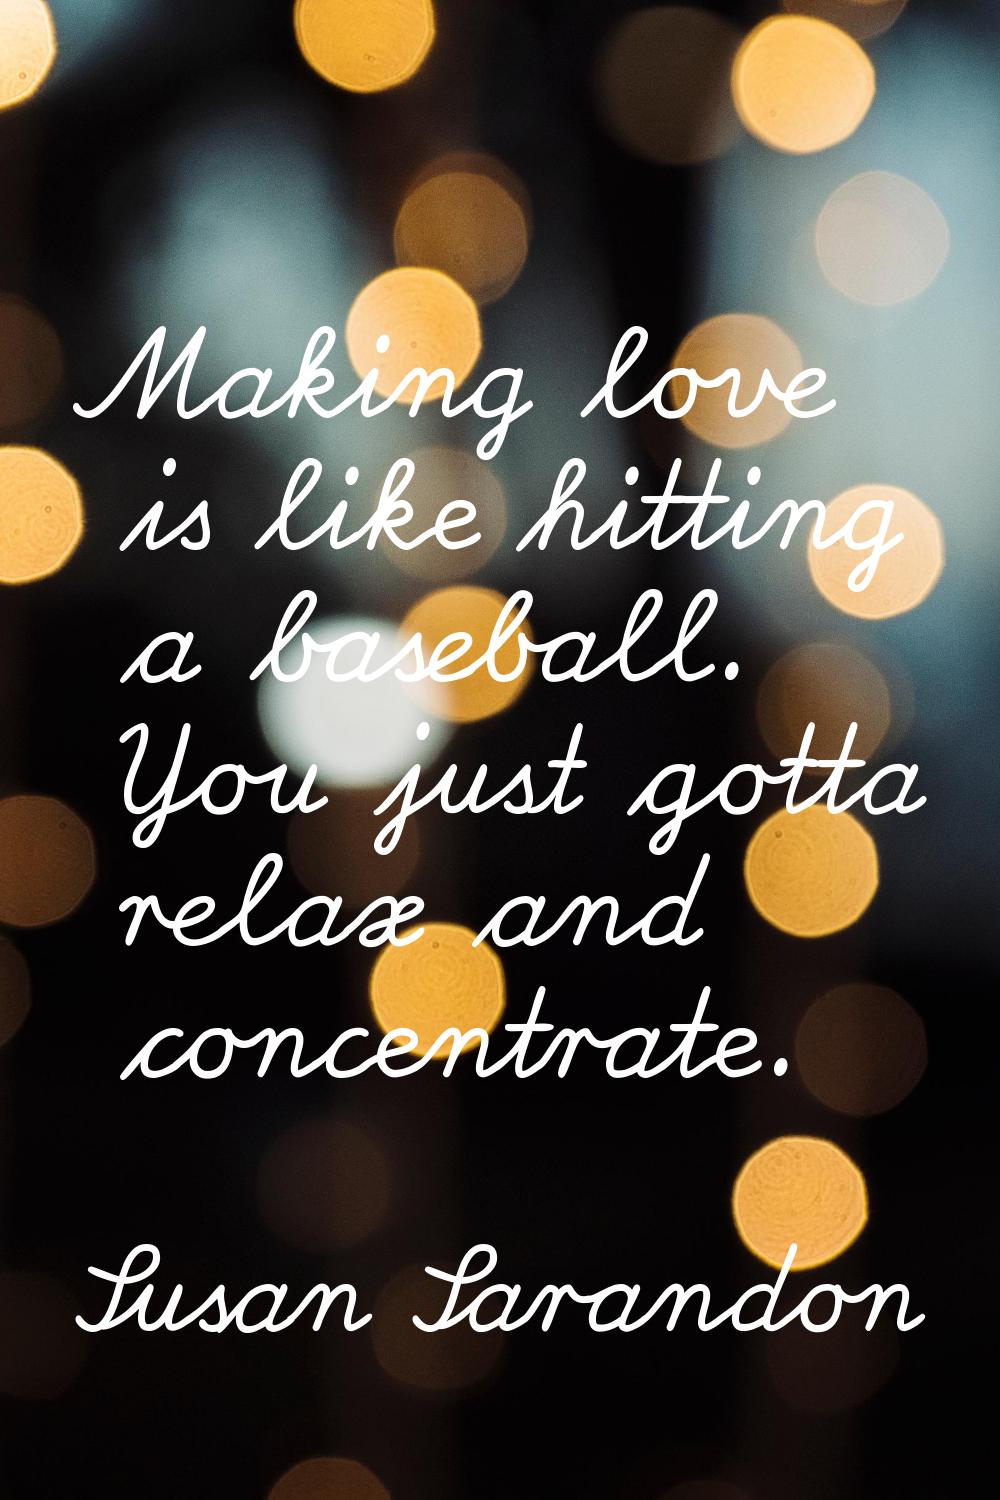 Making love is like hitting a baseball. You just gotta relax and concentrate.